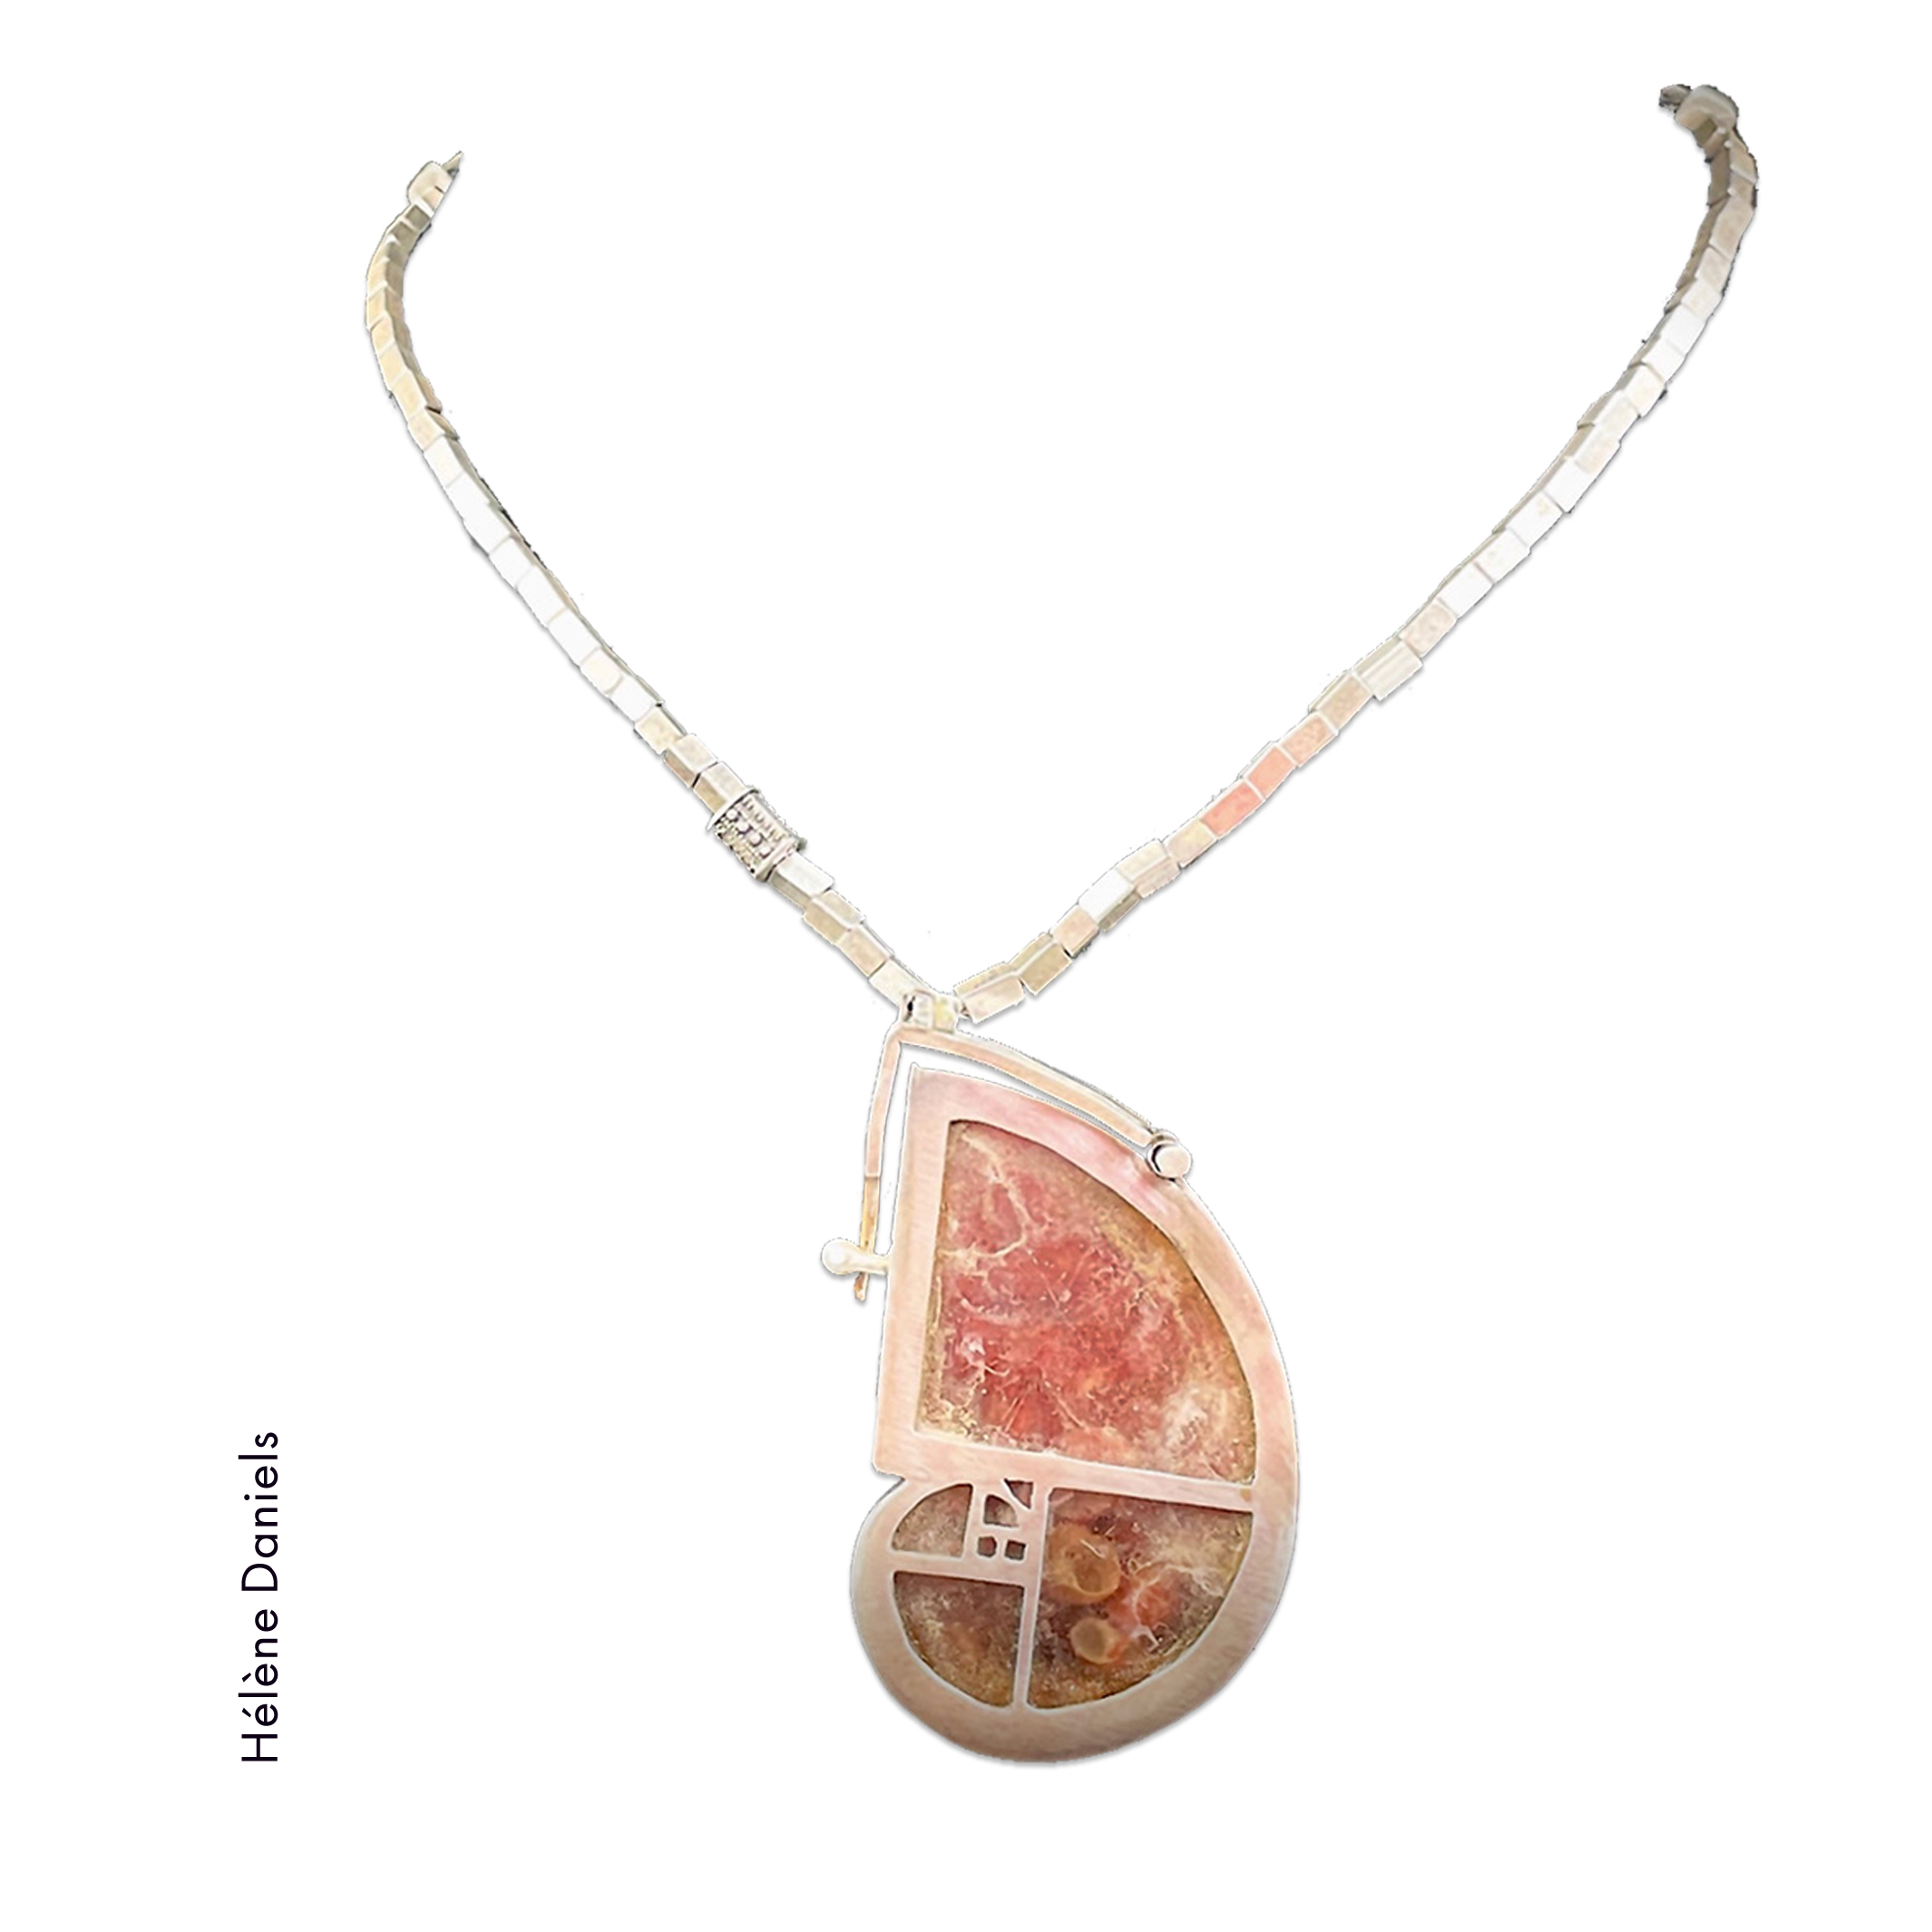 Necklace with square bead covered chain, and nautilus shell shaped pendant with fossilized stone by Helene Daniels